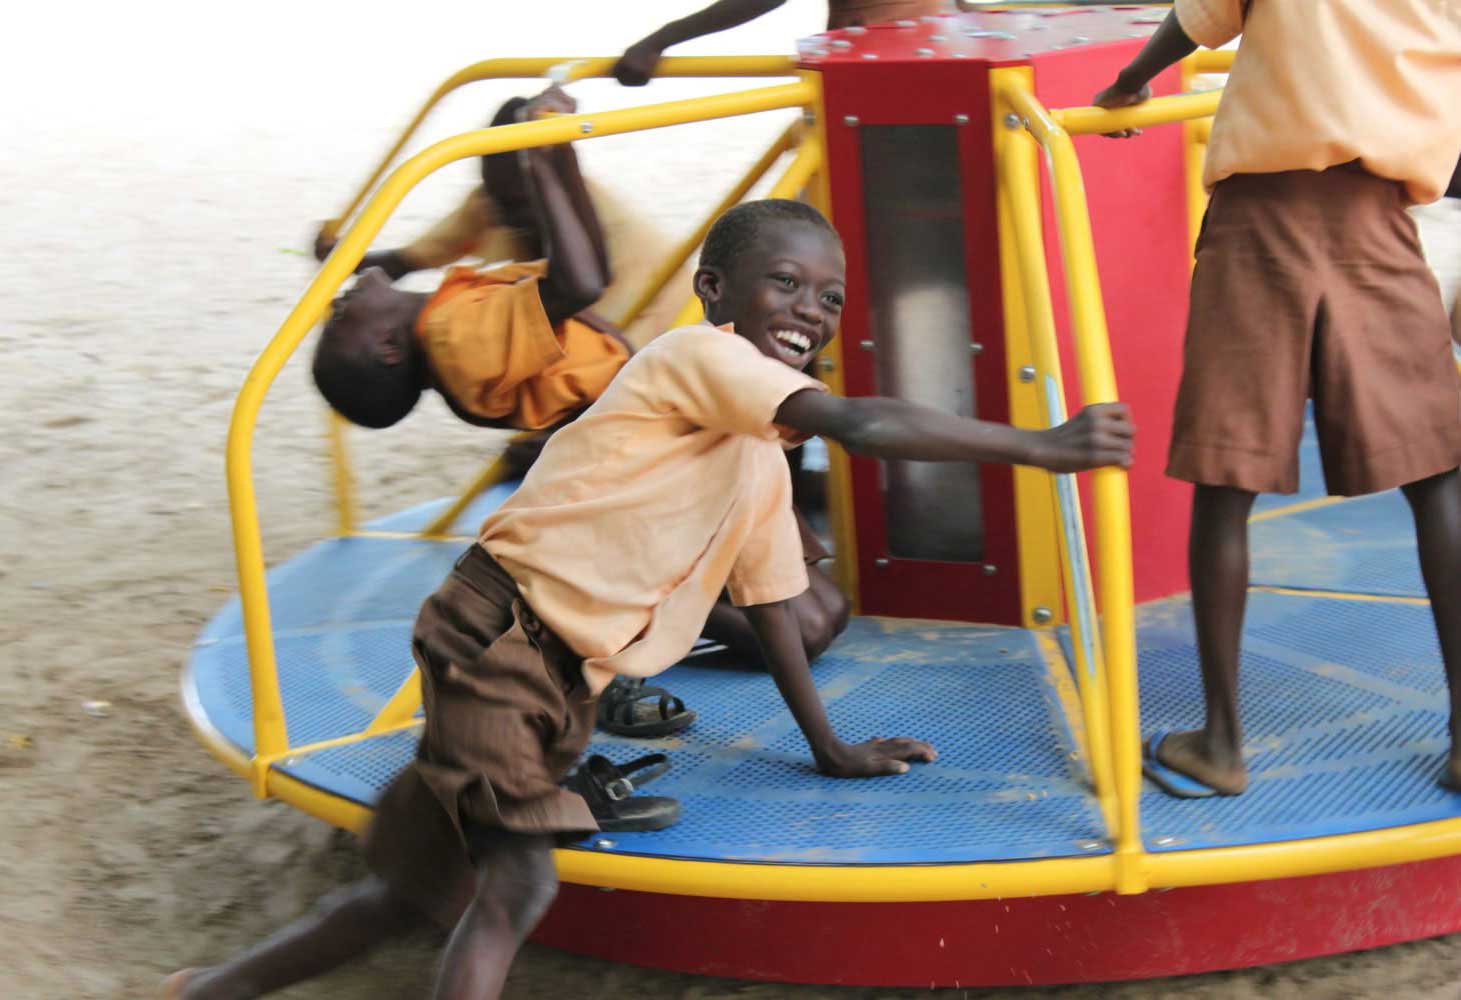 A boy smiles on a merry-go-round as he plays on it with other kids.